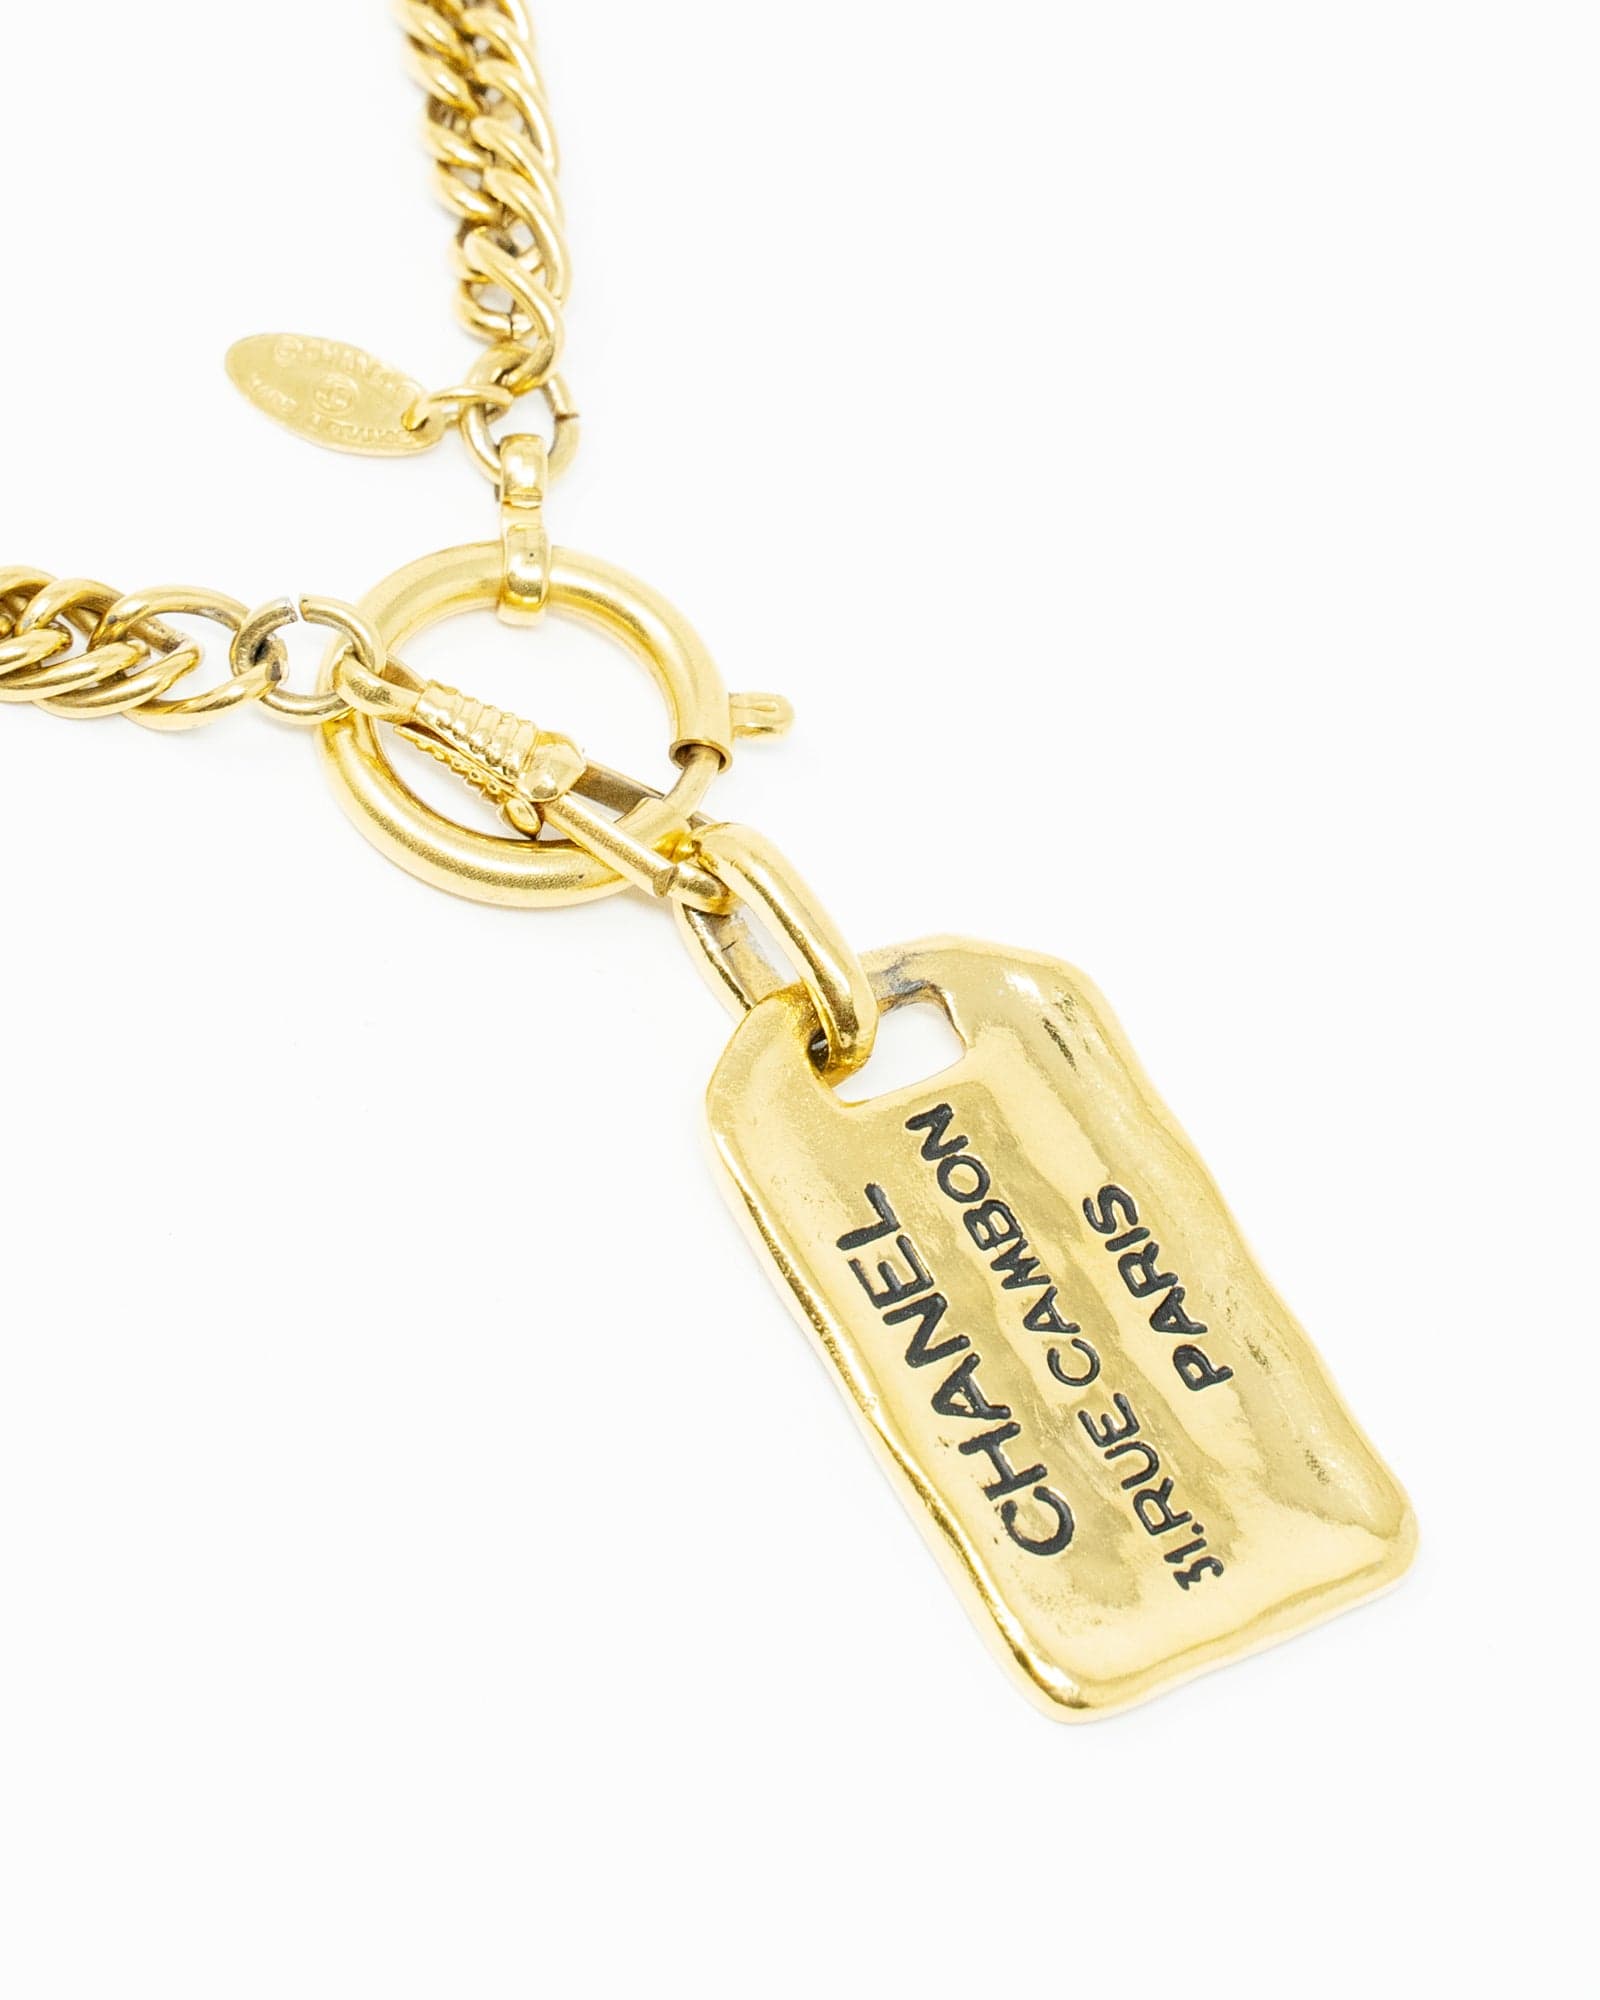 Chanel Vintage Chanel 31 Rue Cambon Paris gold plated dog tag chain necklace - AEC1004